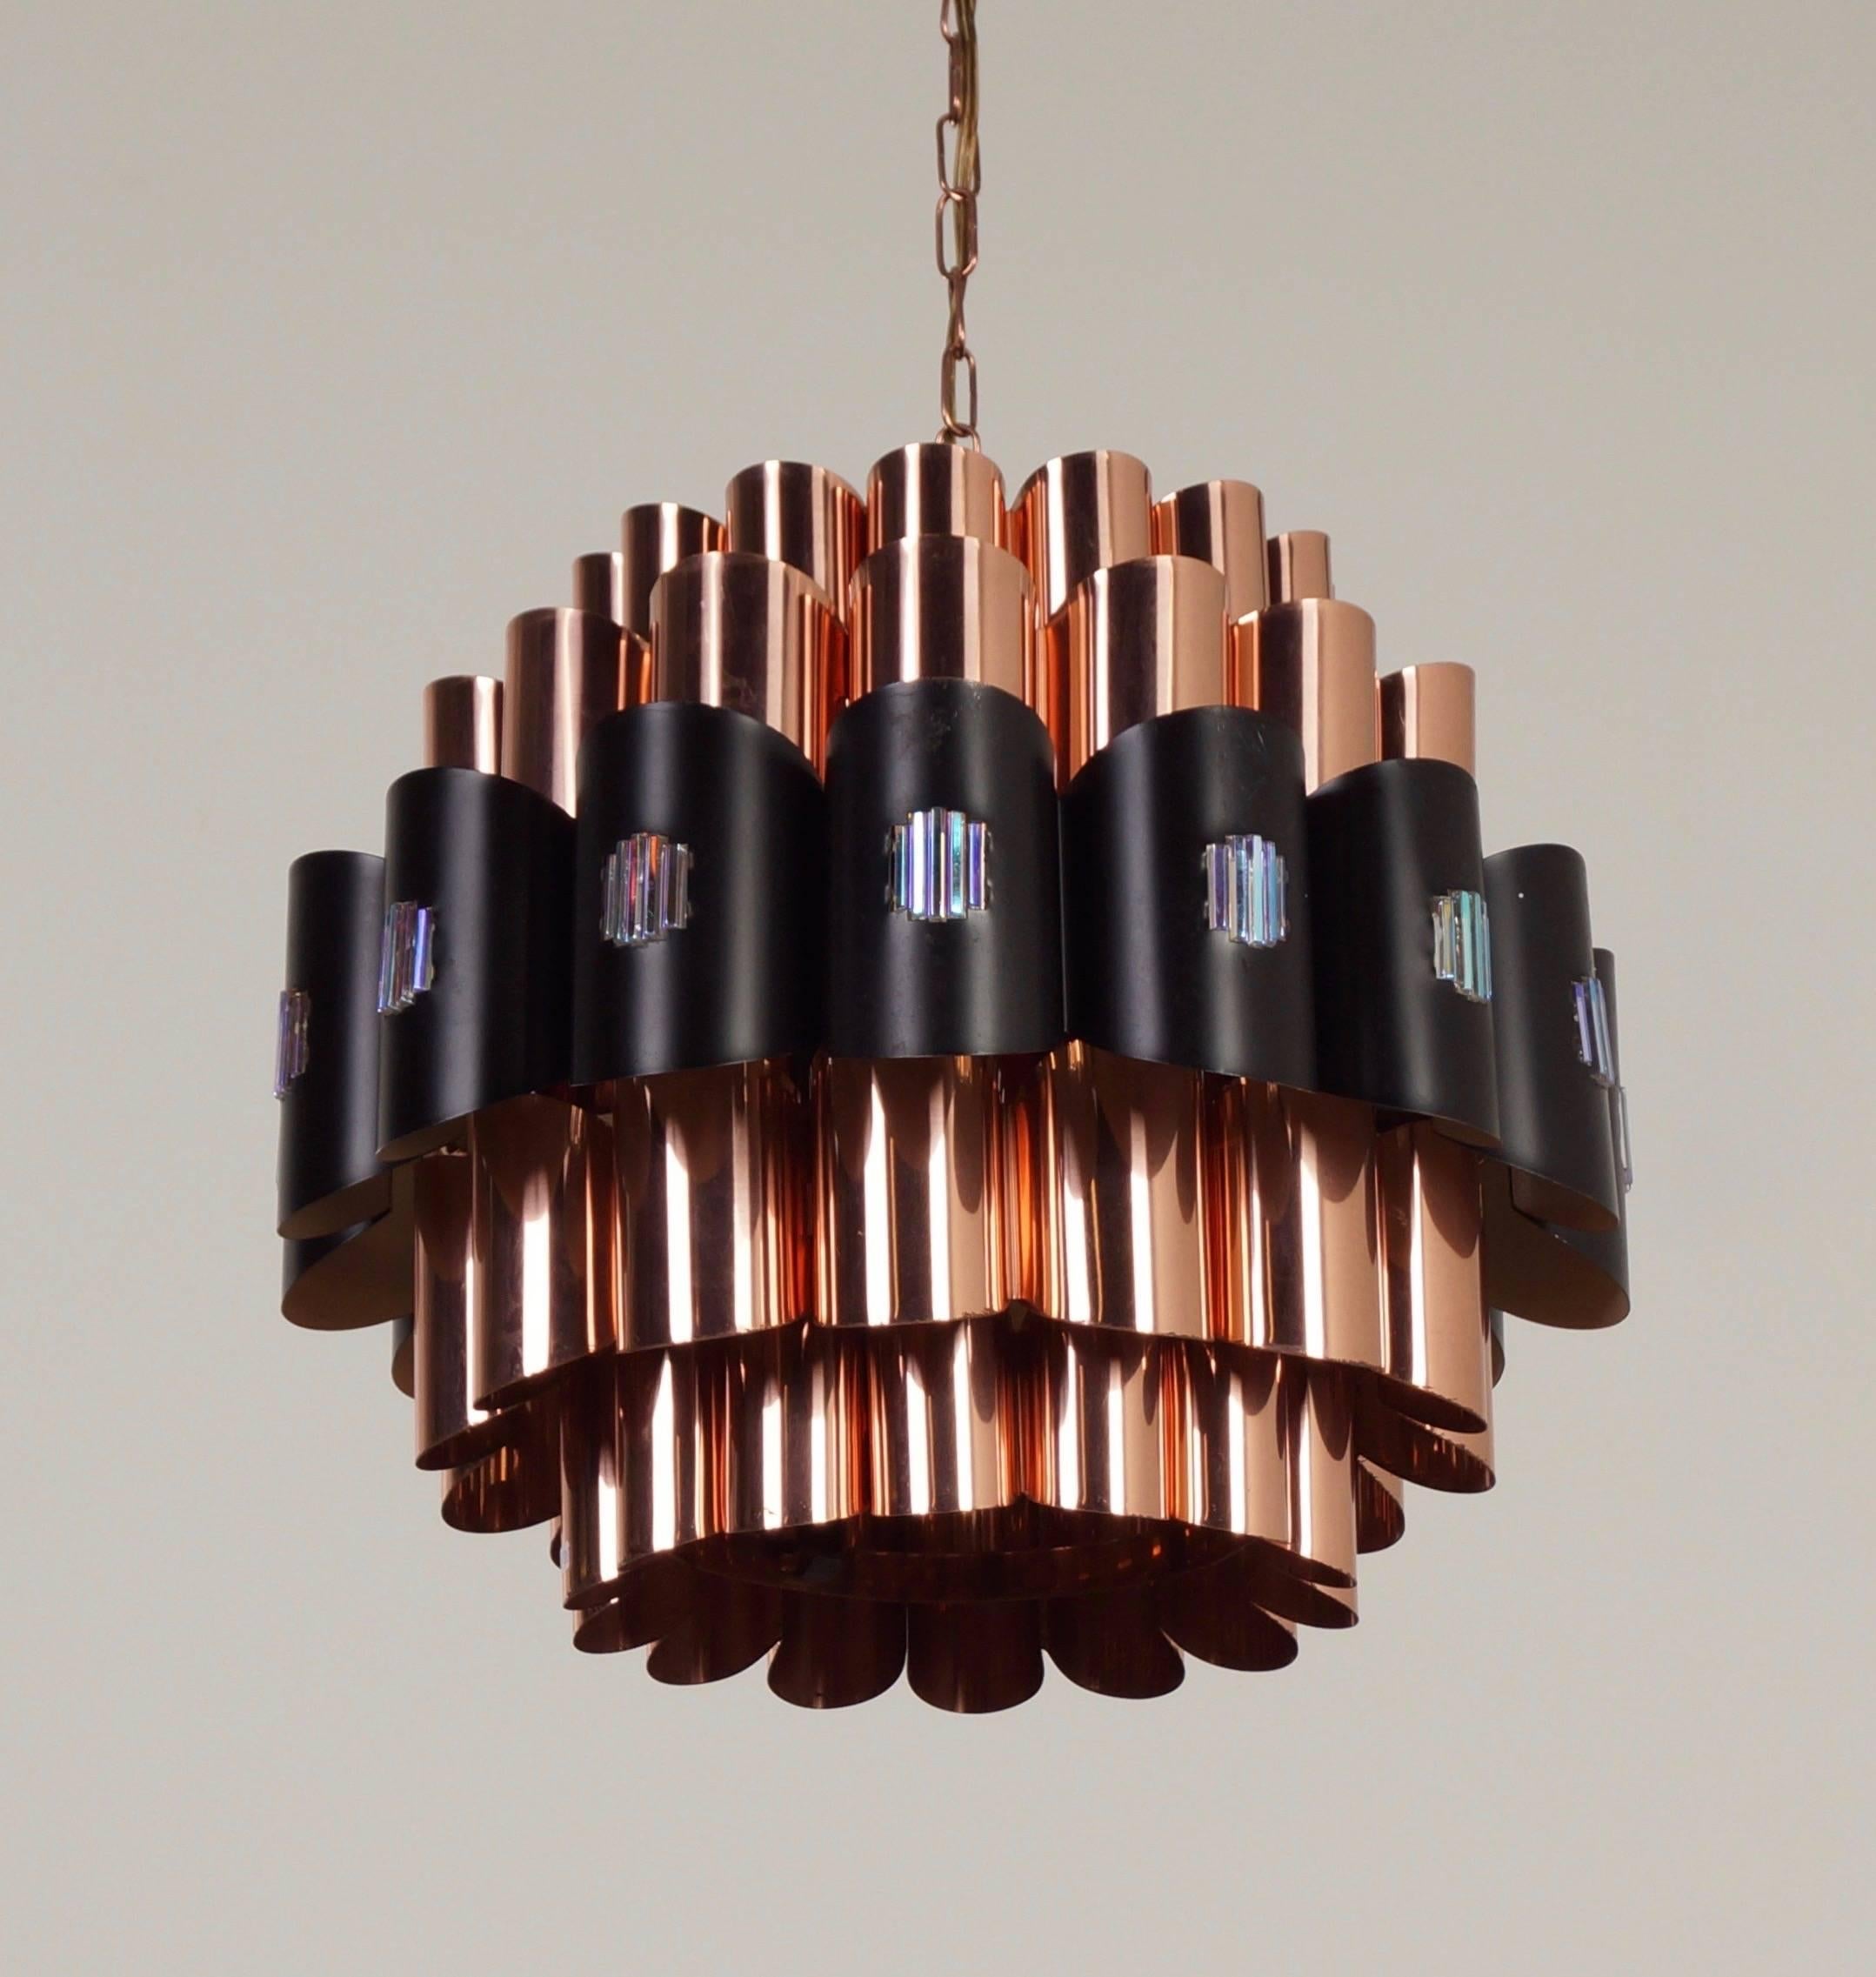 Danish pendant designed by Werner Schou for Coronell Elektro, Denmark, circa 1970. These lamps give a sculptural light effect, which is very characteristic for the lamps by Werner Schou. Material: copper, black lacquered metal and glass pebbles